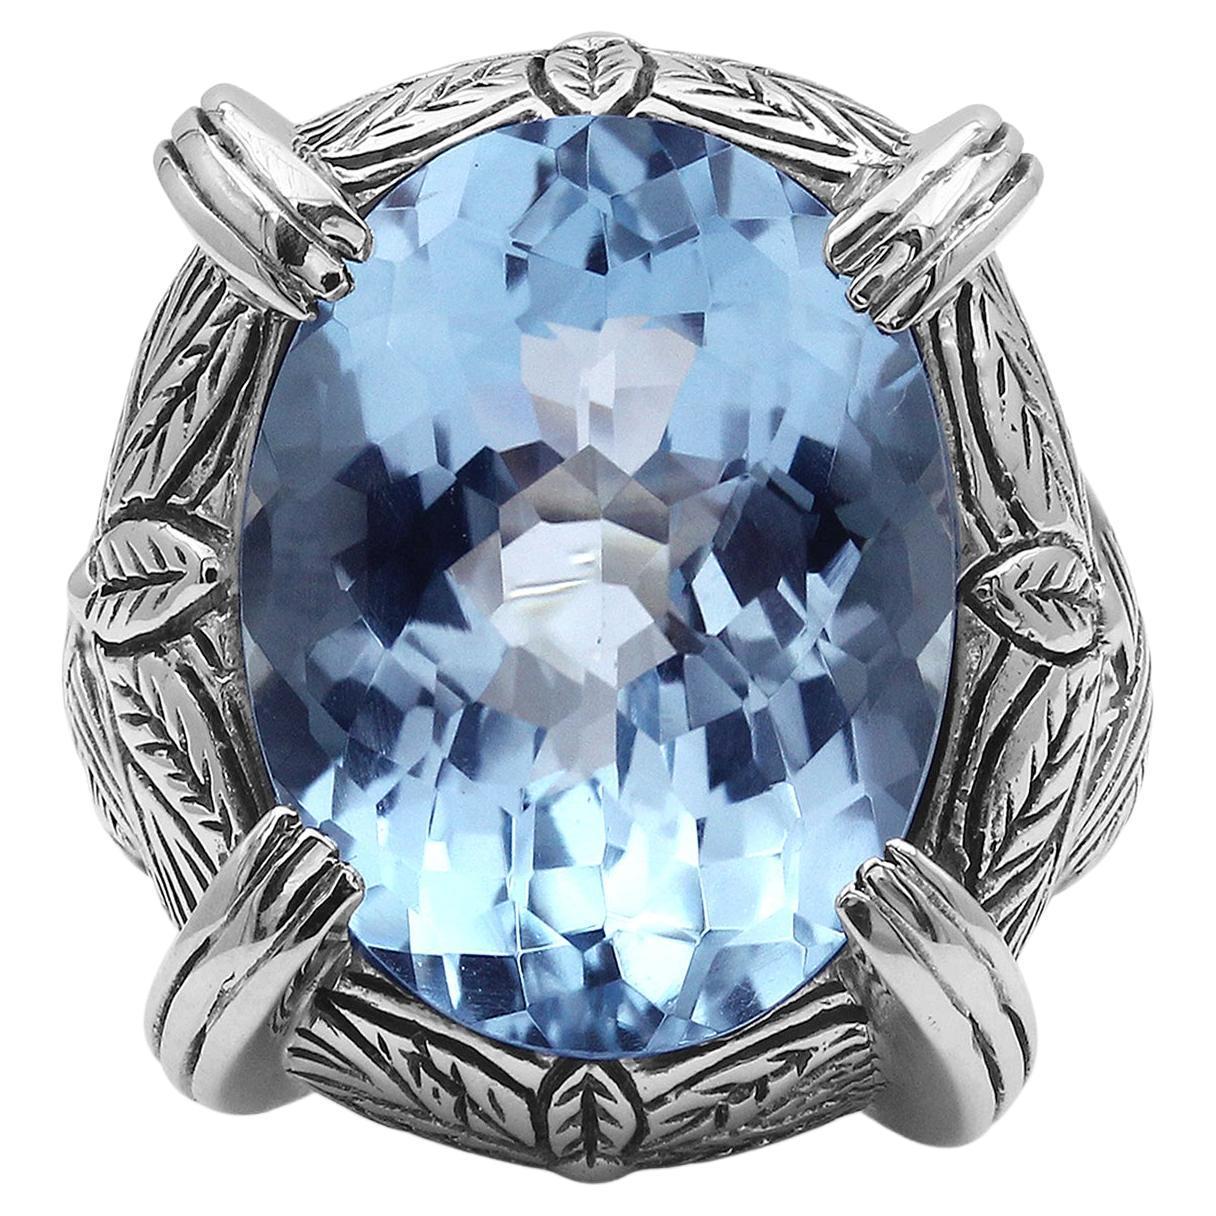 Faceted Blue Topaz Ring in Engraved Sterling Silver